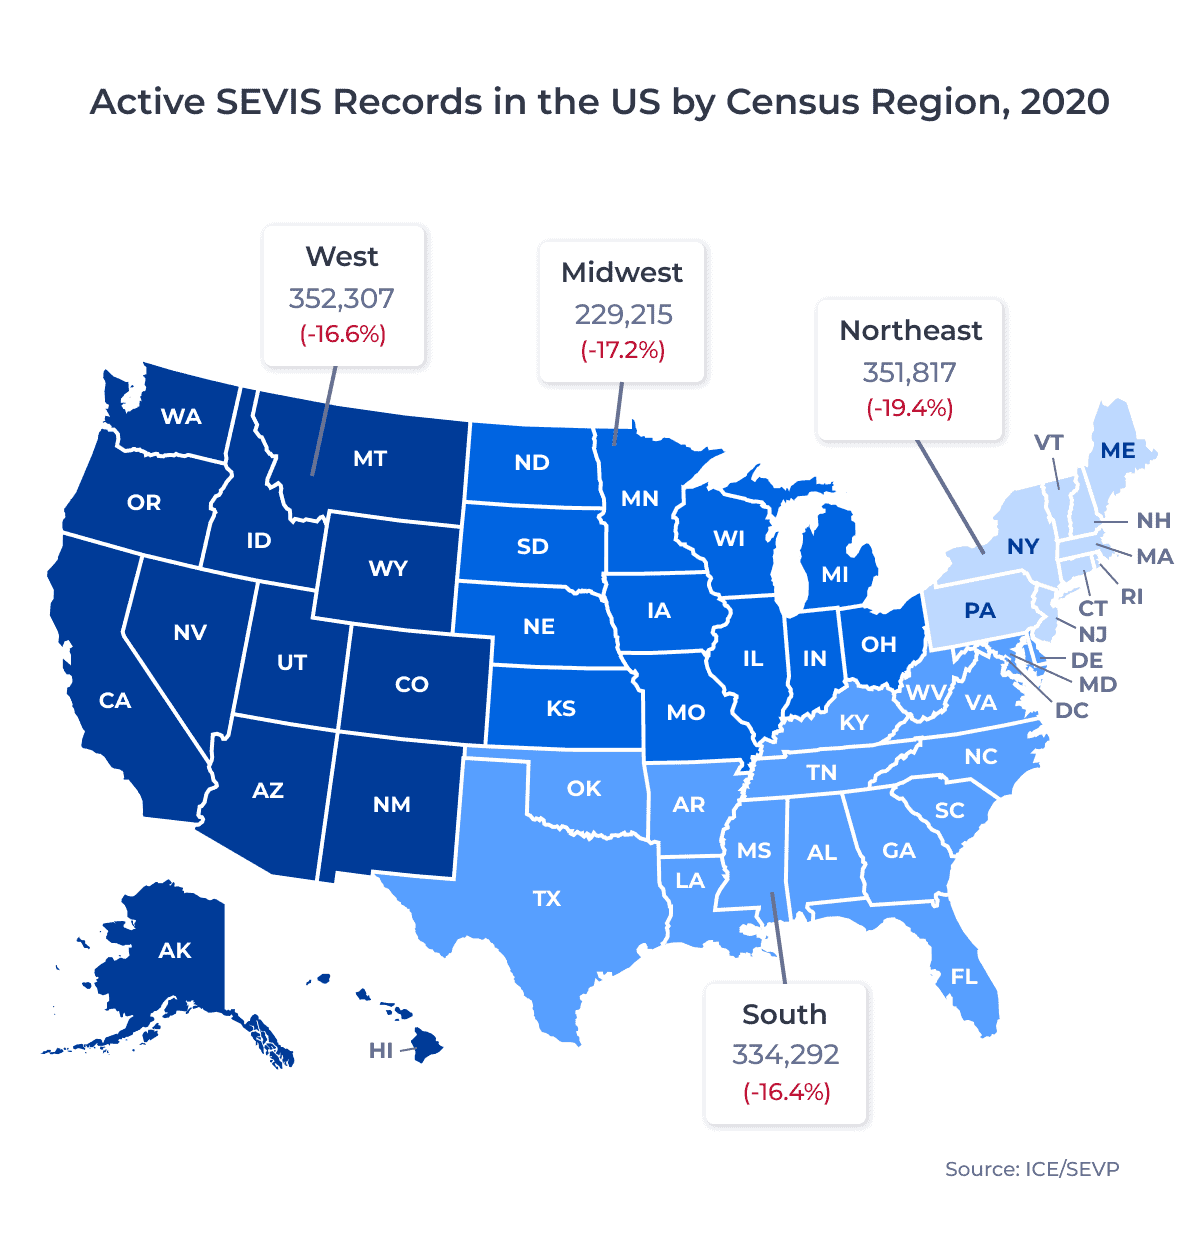 Map of the US showing the distribution of active SEVIS records in the country by census region in 2020. Examined in detail below.